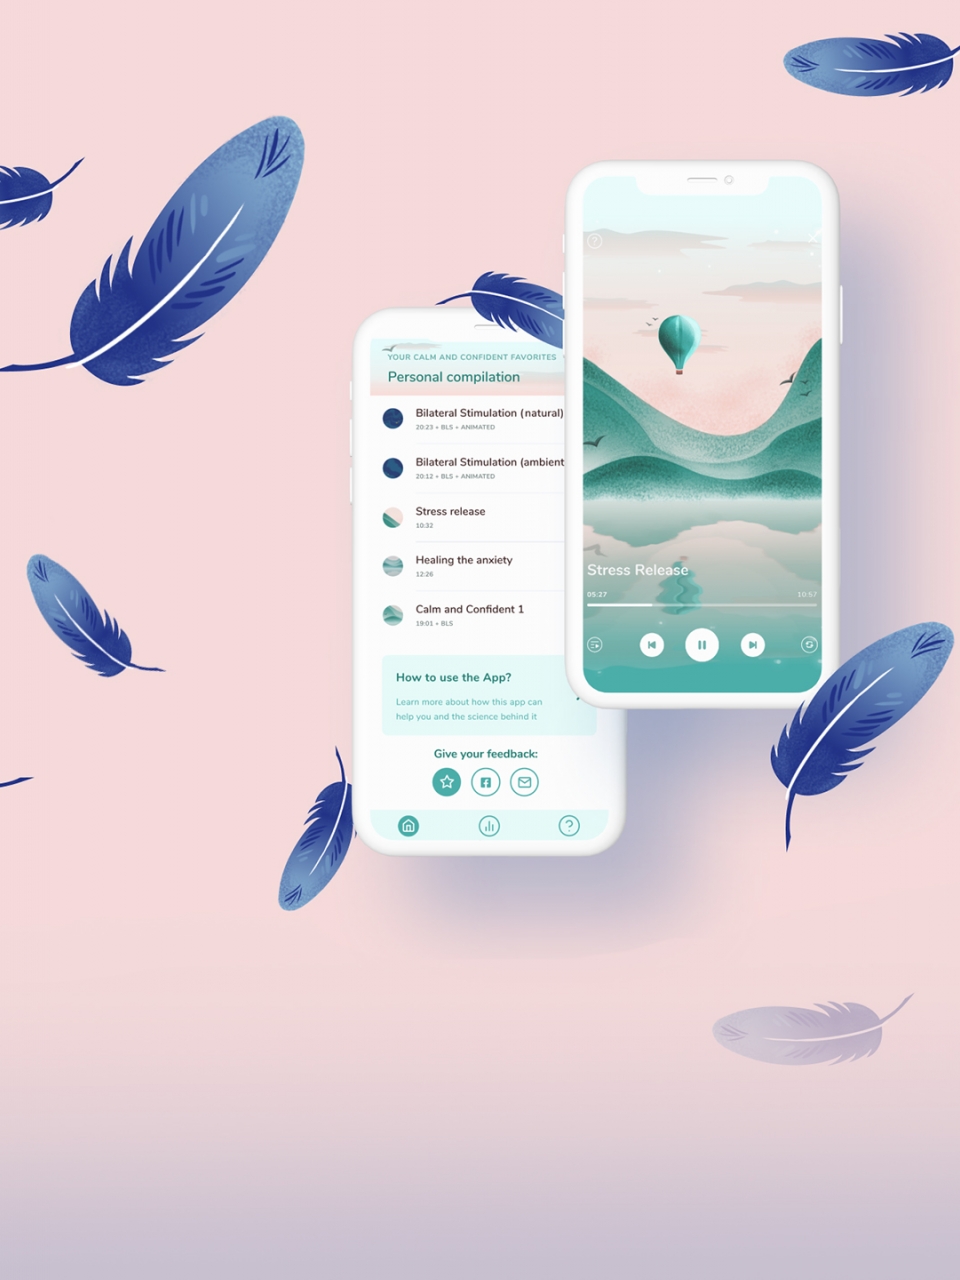 A mobile app to help the users to feel calm based on EMDR